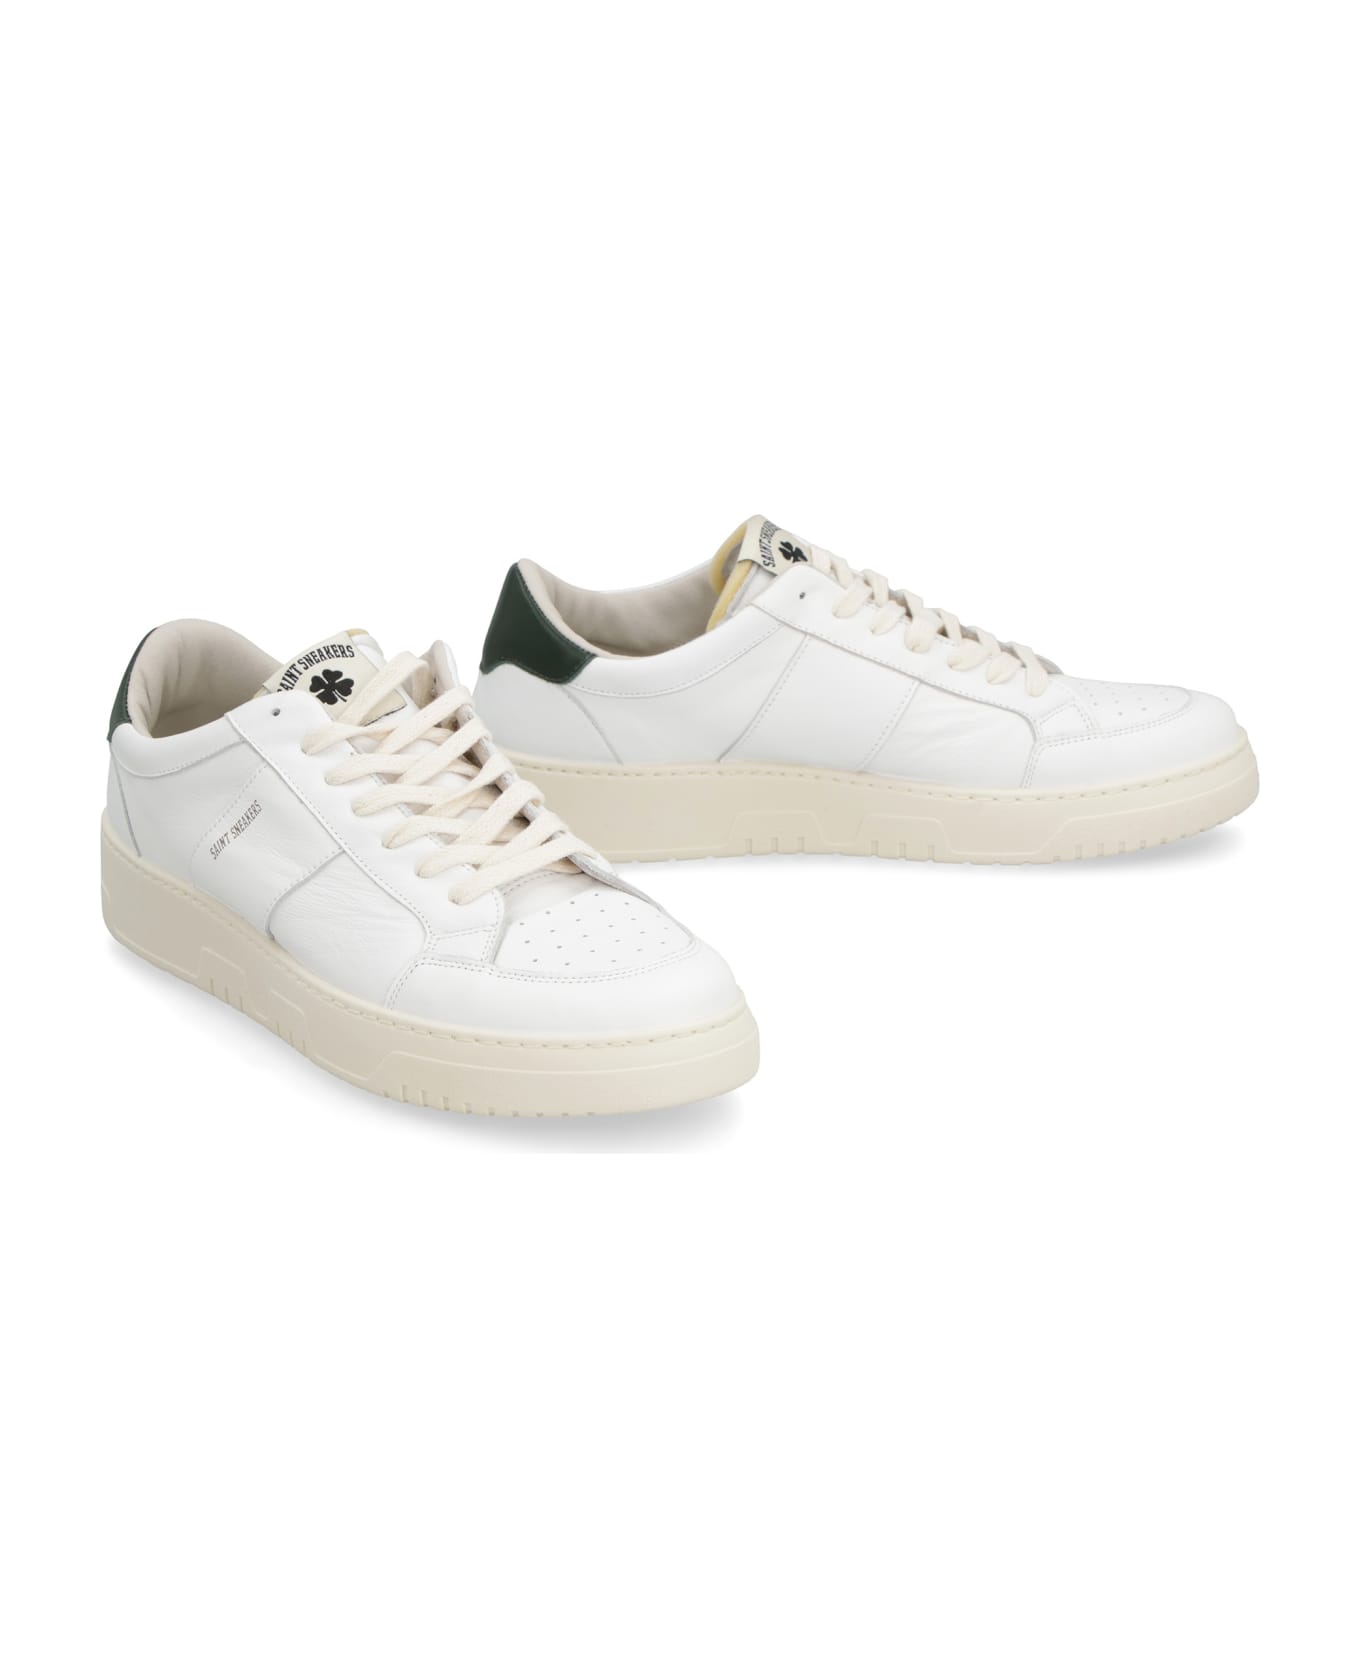 Saint Sneakers Golf Leather Low-top Sneakers - White/green スニーカー